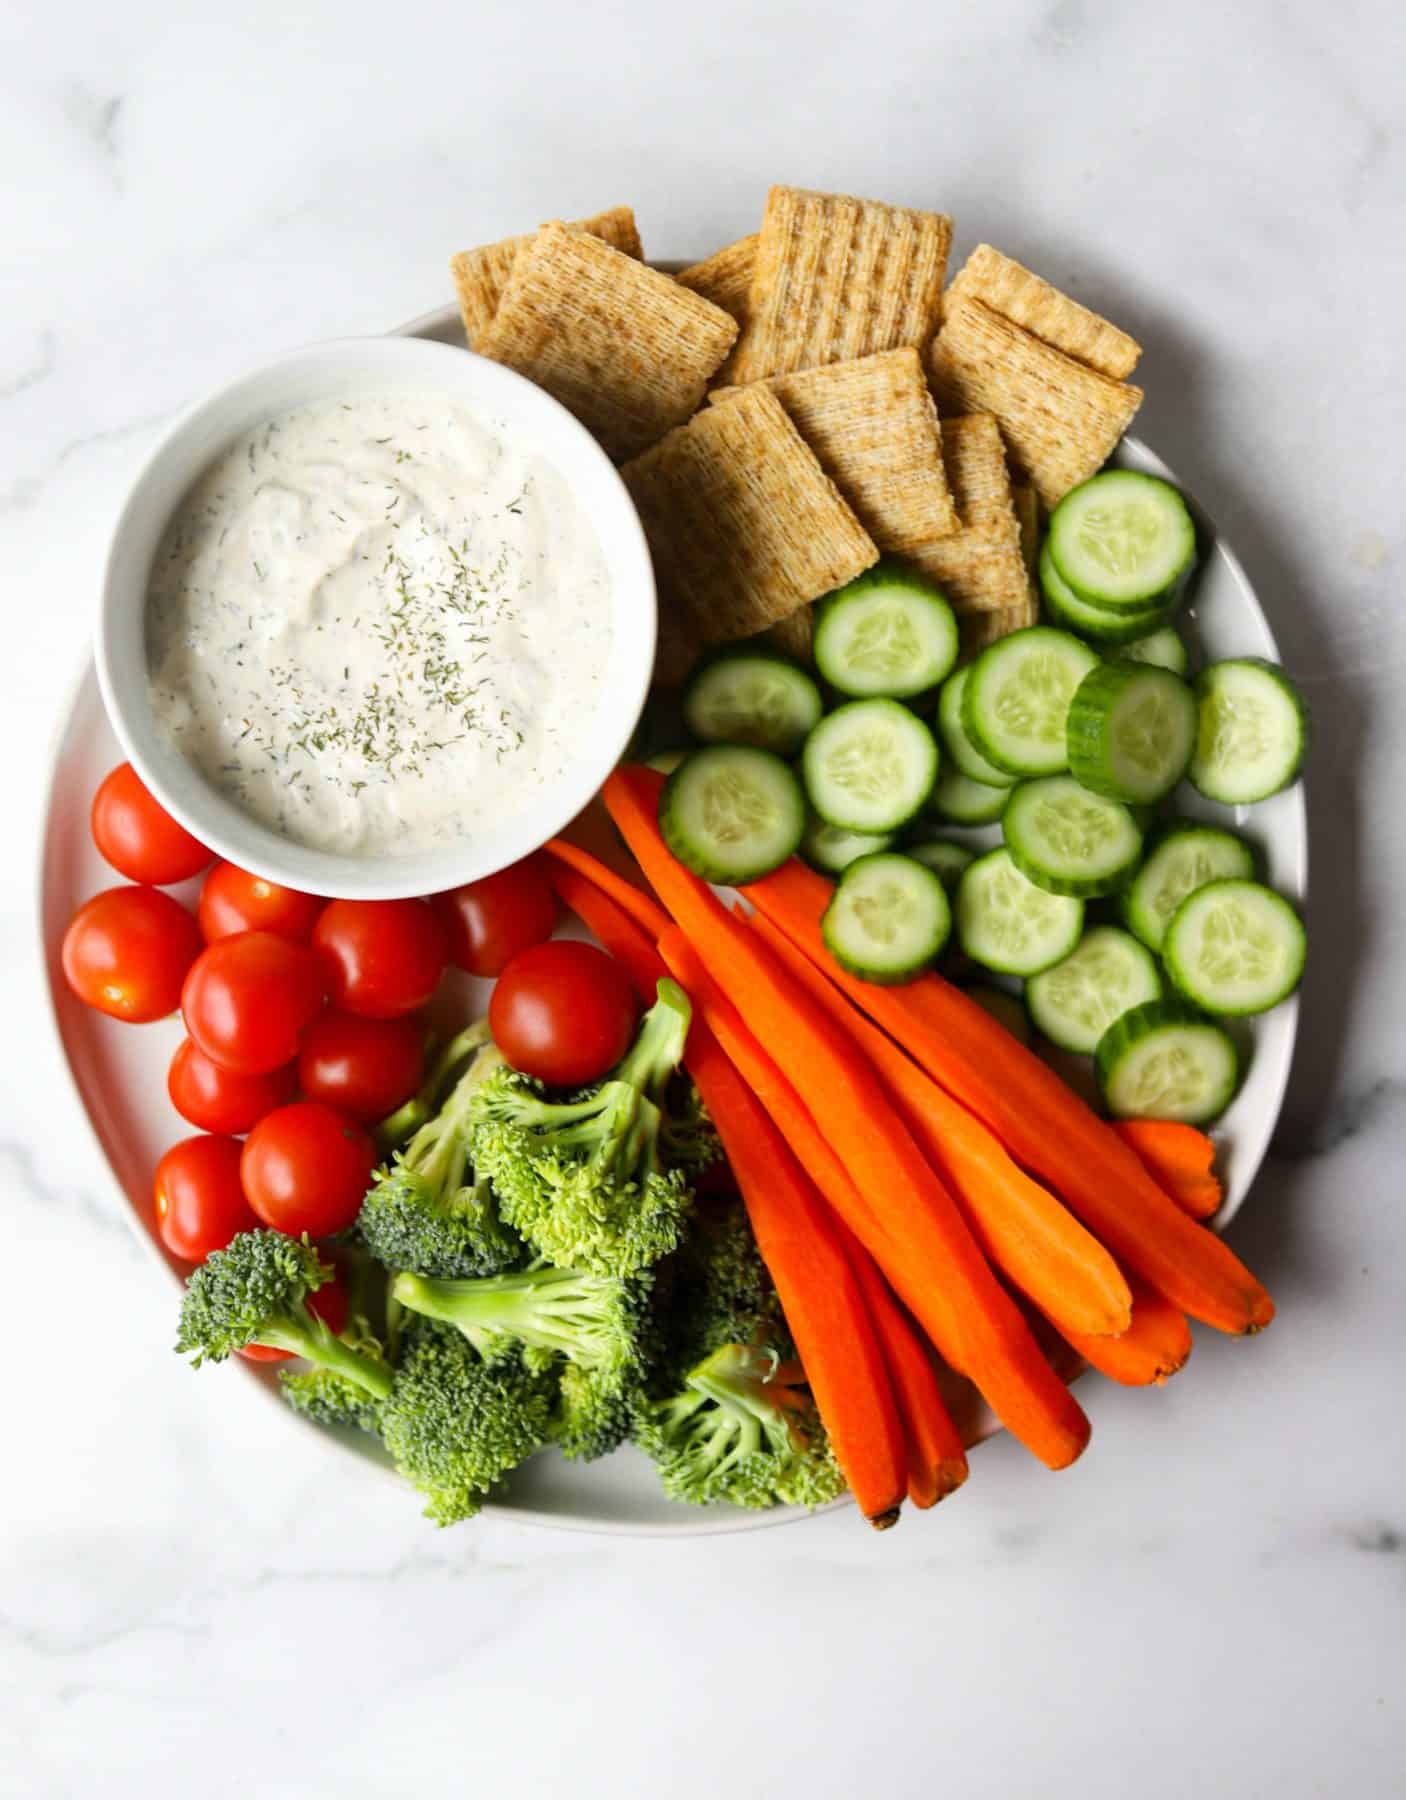 Veggie tray on white marble backdrop as an example of an easy way to eat more vegetables